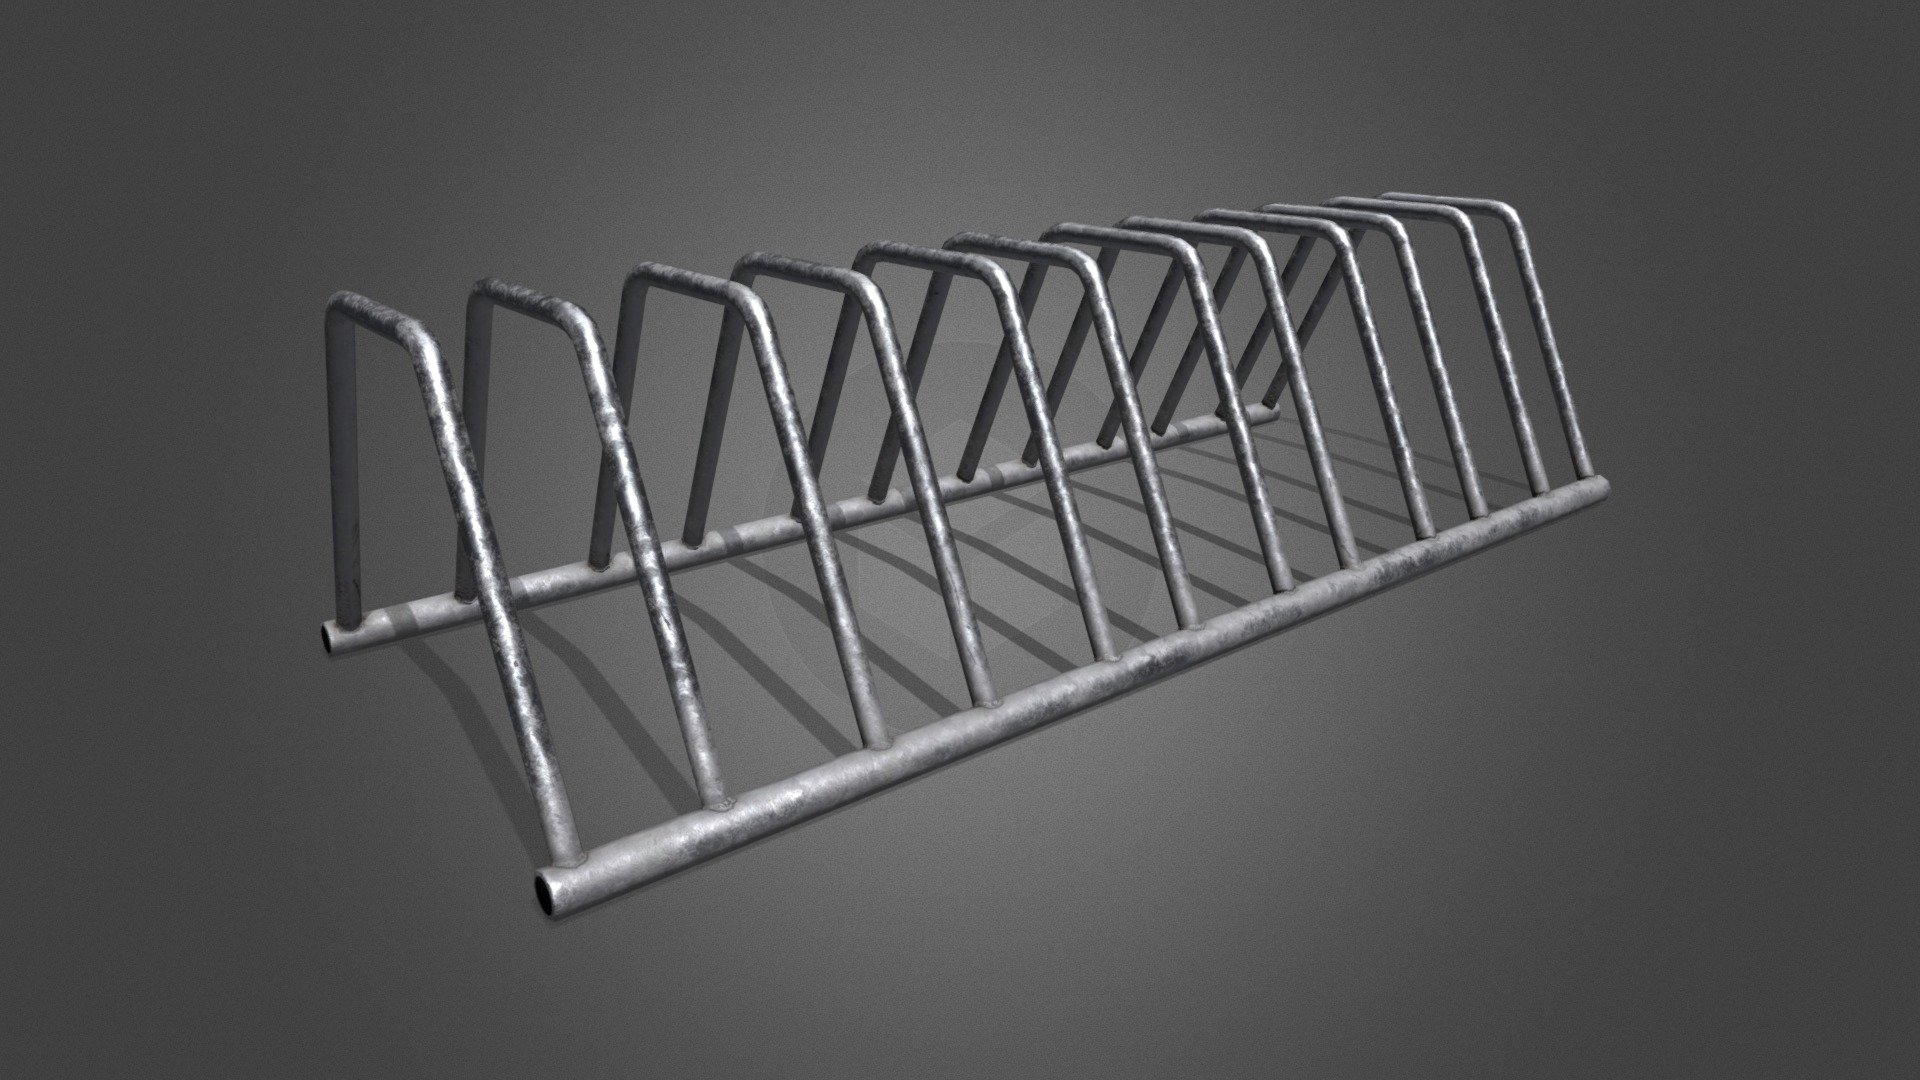 Low-poly, Game-ready model of a metal bicycle rack.

TEXTURES

High resolution PBR Metal/Roughness textures are provided in the additional files.

Texture size: 2048 x 2048
Texture format: PNG 8 bit (uncompressed)




Base Color (Diffuse)

Metallic

Roughness

Height

Normal 

Ambient Occlusion

This asset is part of our City collection which features many more models to re-create the perfect city for your projects!

Check out all our City models here - Bicycle Rack - Buy Royalty Free 3D model by Ringtail Studios (@ringtail) 3d model